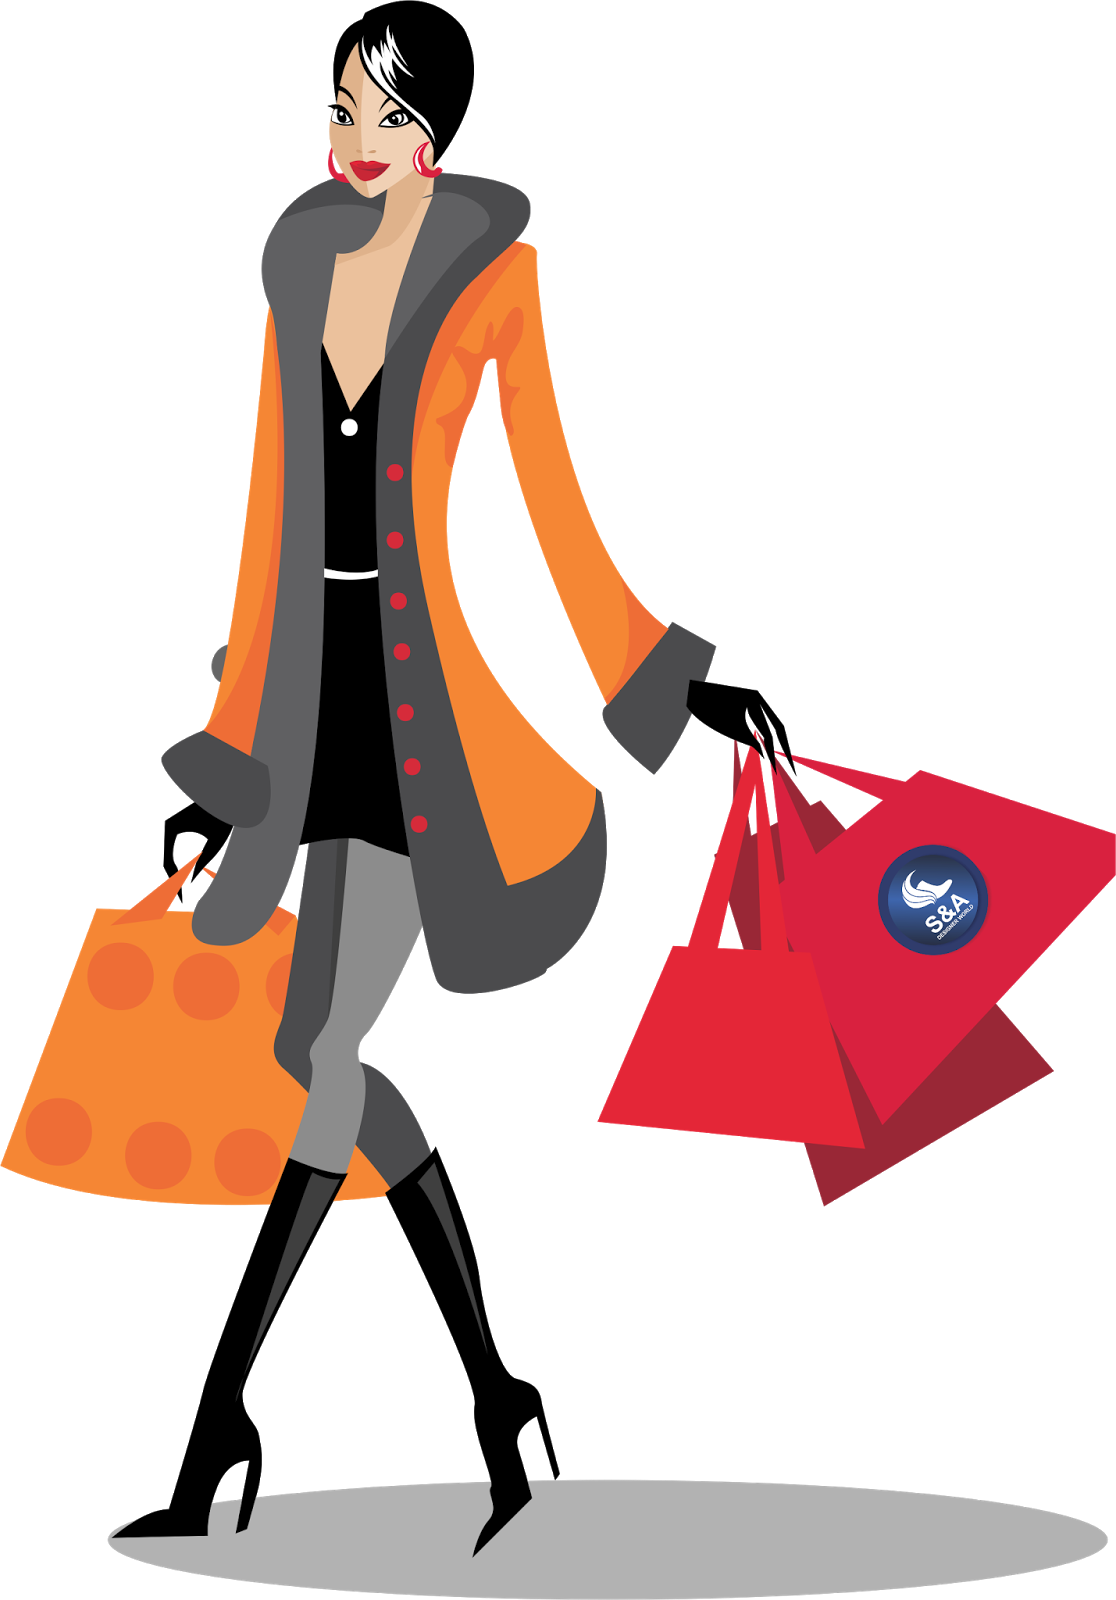 Download PNG image - Shopping